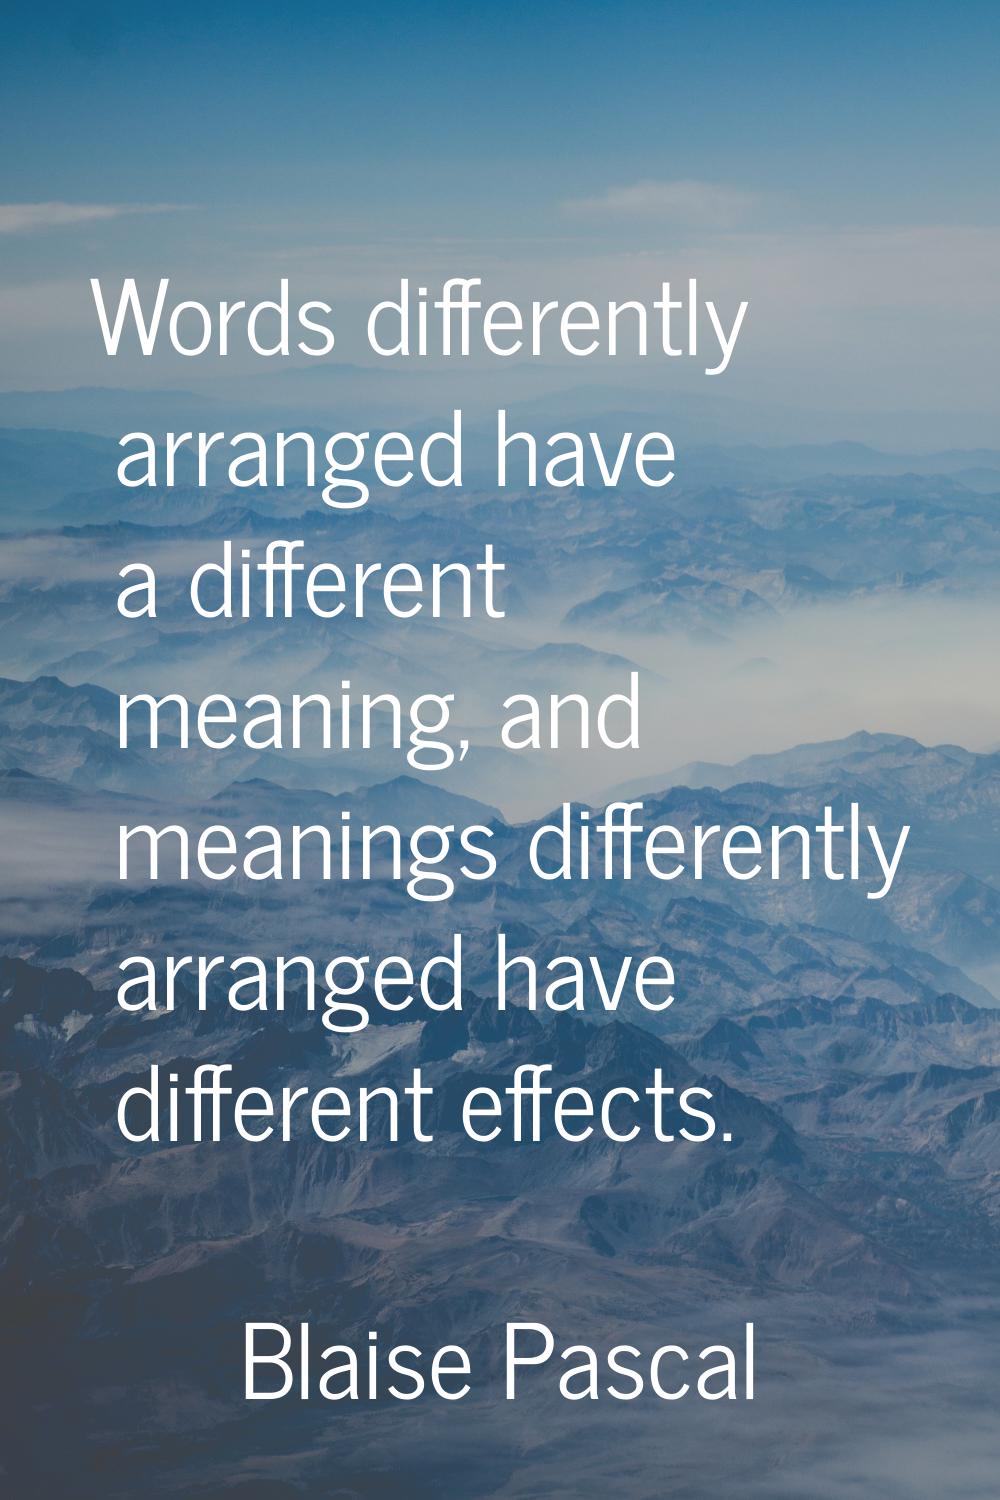 Words differently arranged have a different meaning, and meanings differently arranged have differe